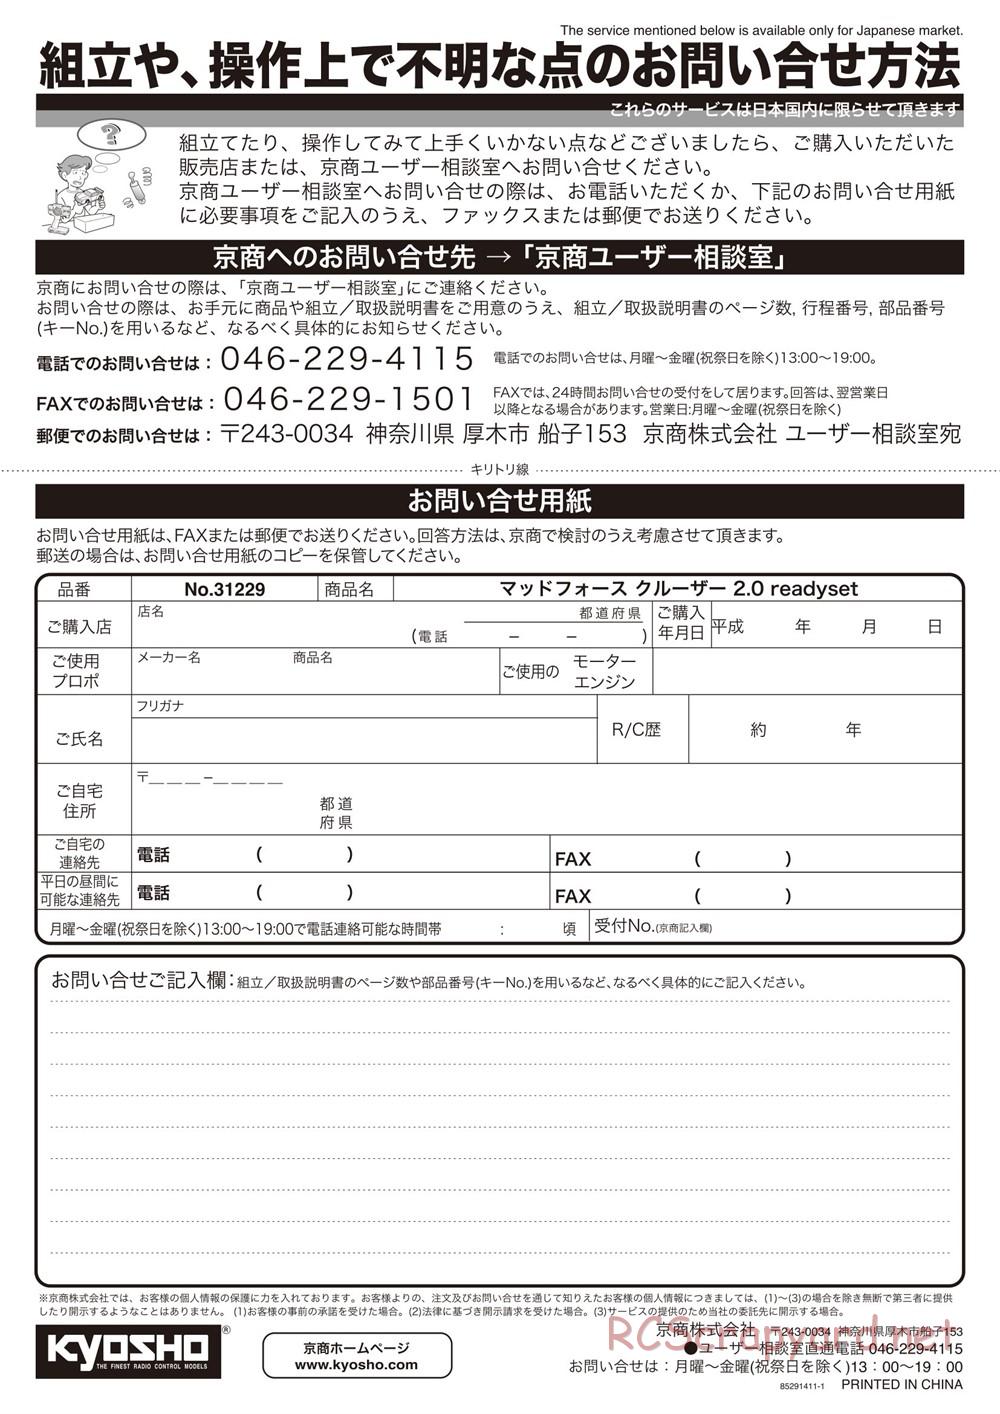 Kyosho - Mad Force Kruiser 2.0 - Manual - Page 43